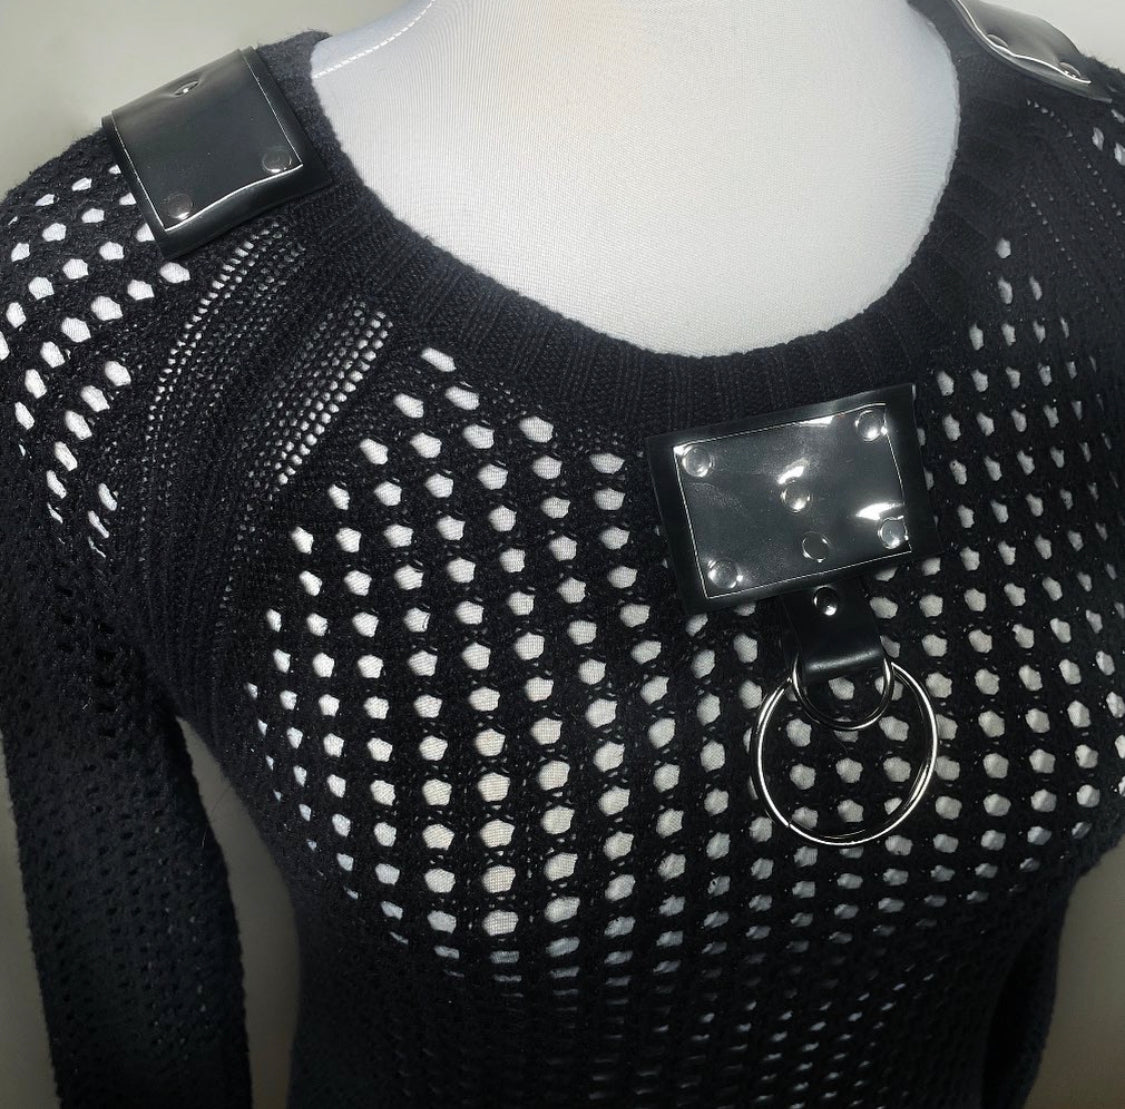 Black Goth Fishnet Sweater with Metallic Silver Accents